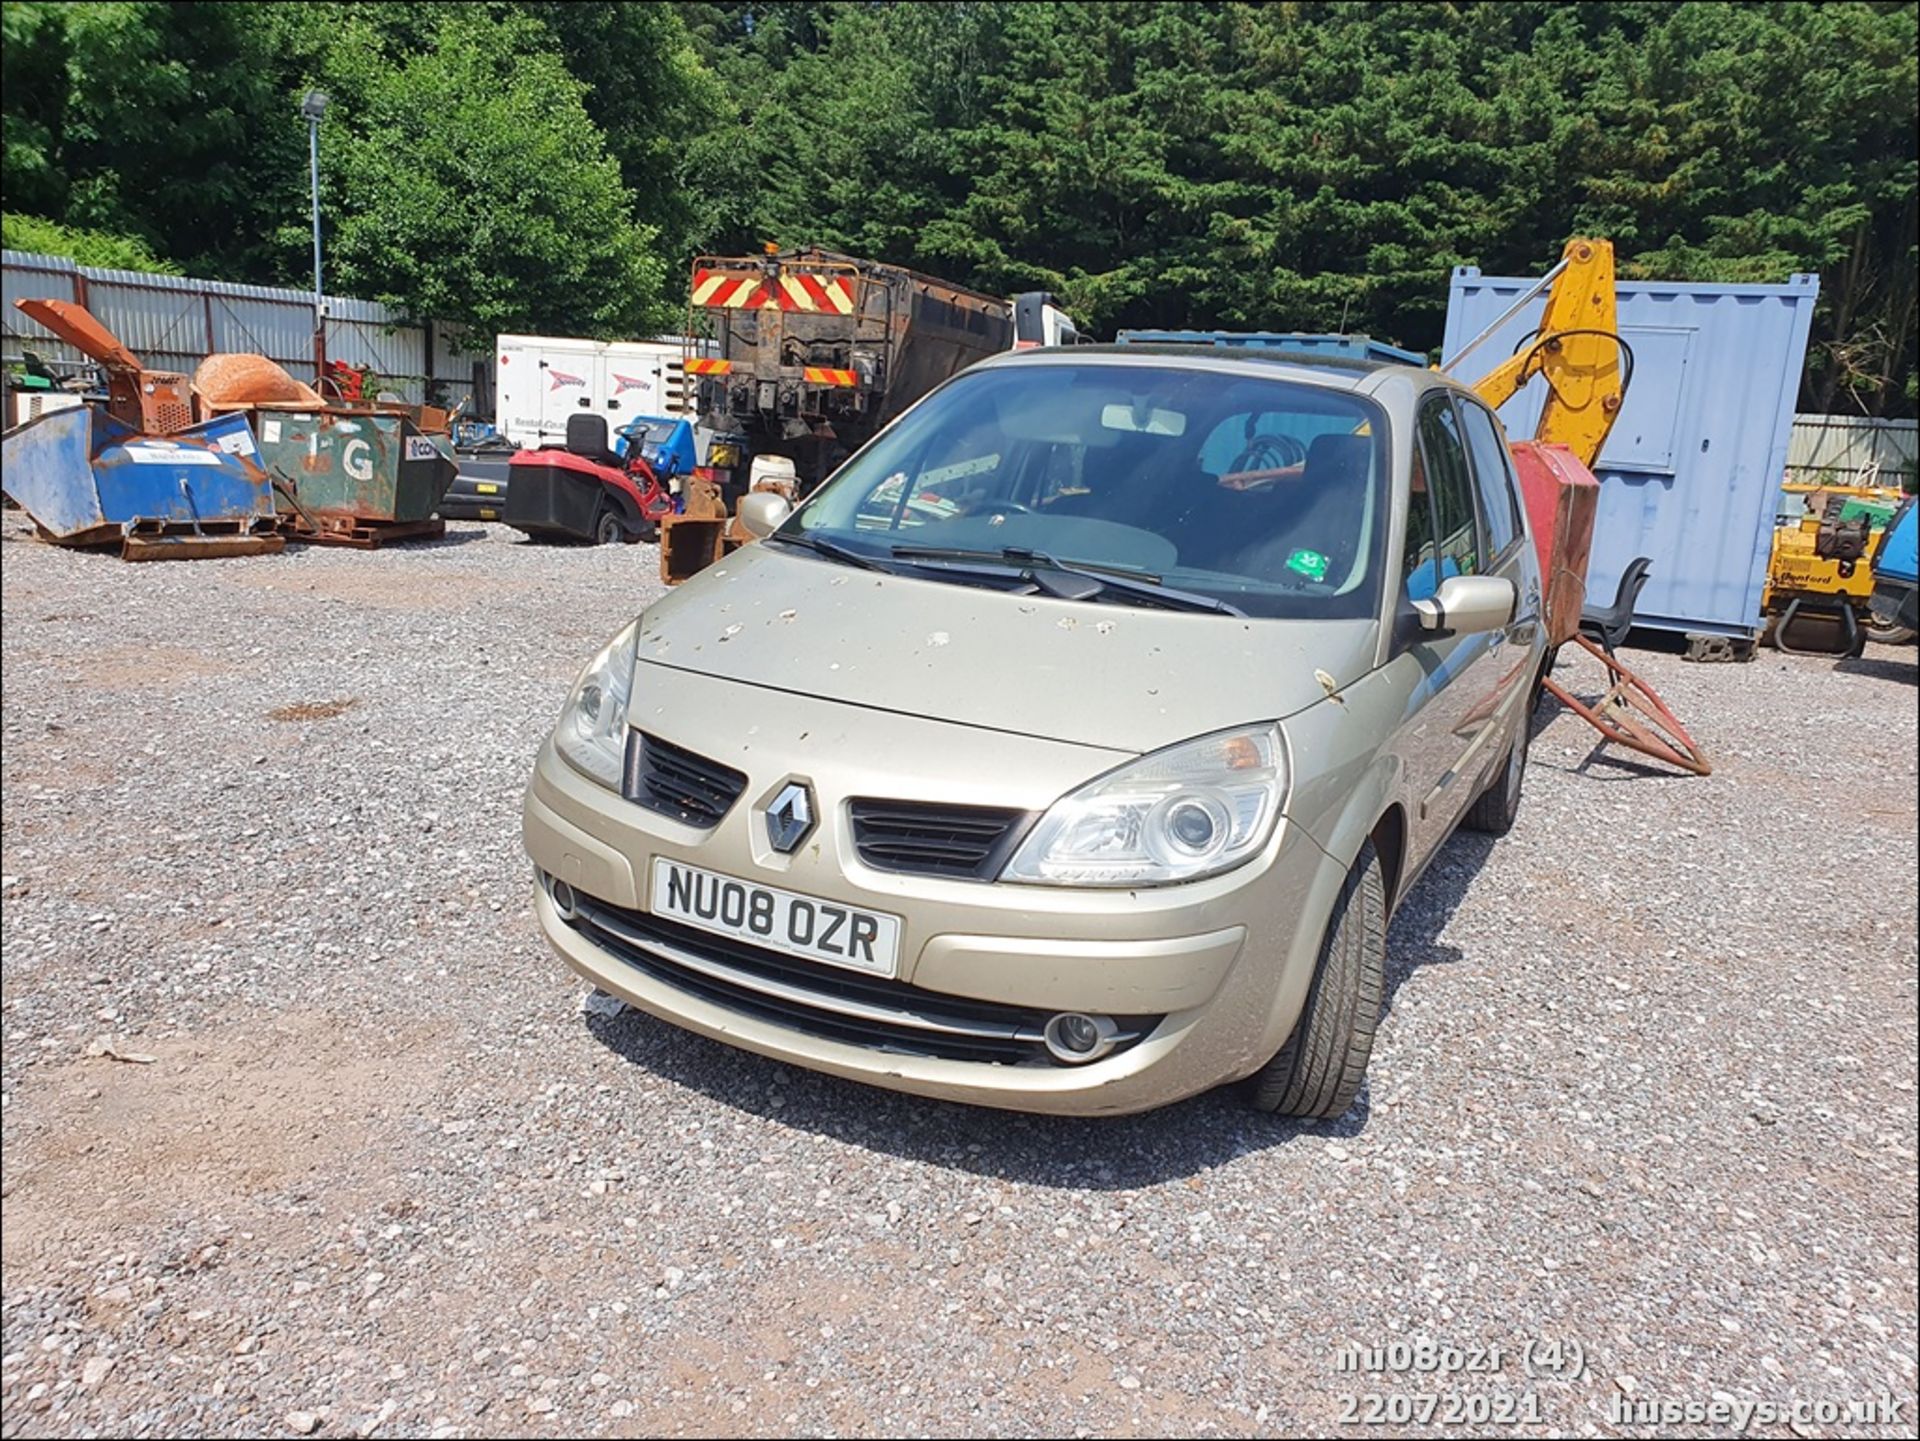 08/08 RENAULT SCENIC DYN DCI 106 - 1461cc 5dr MPV (Gold) - Image 5 of 16